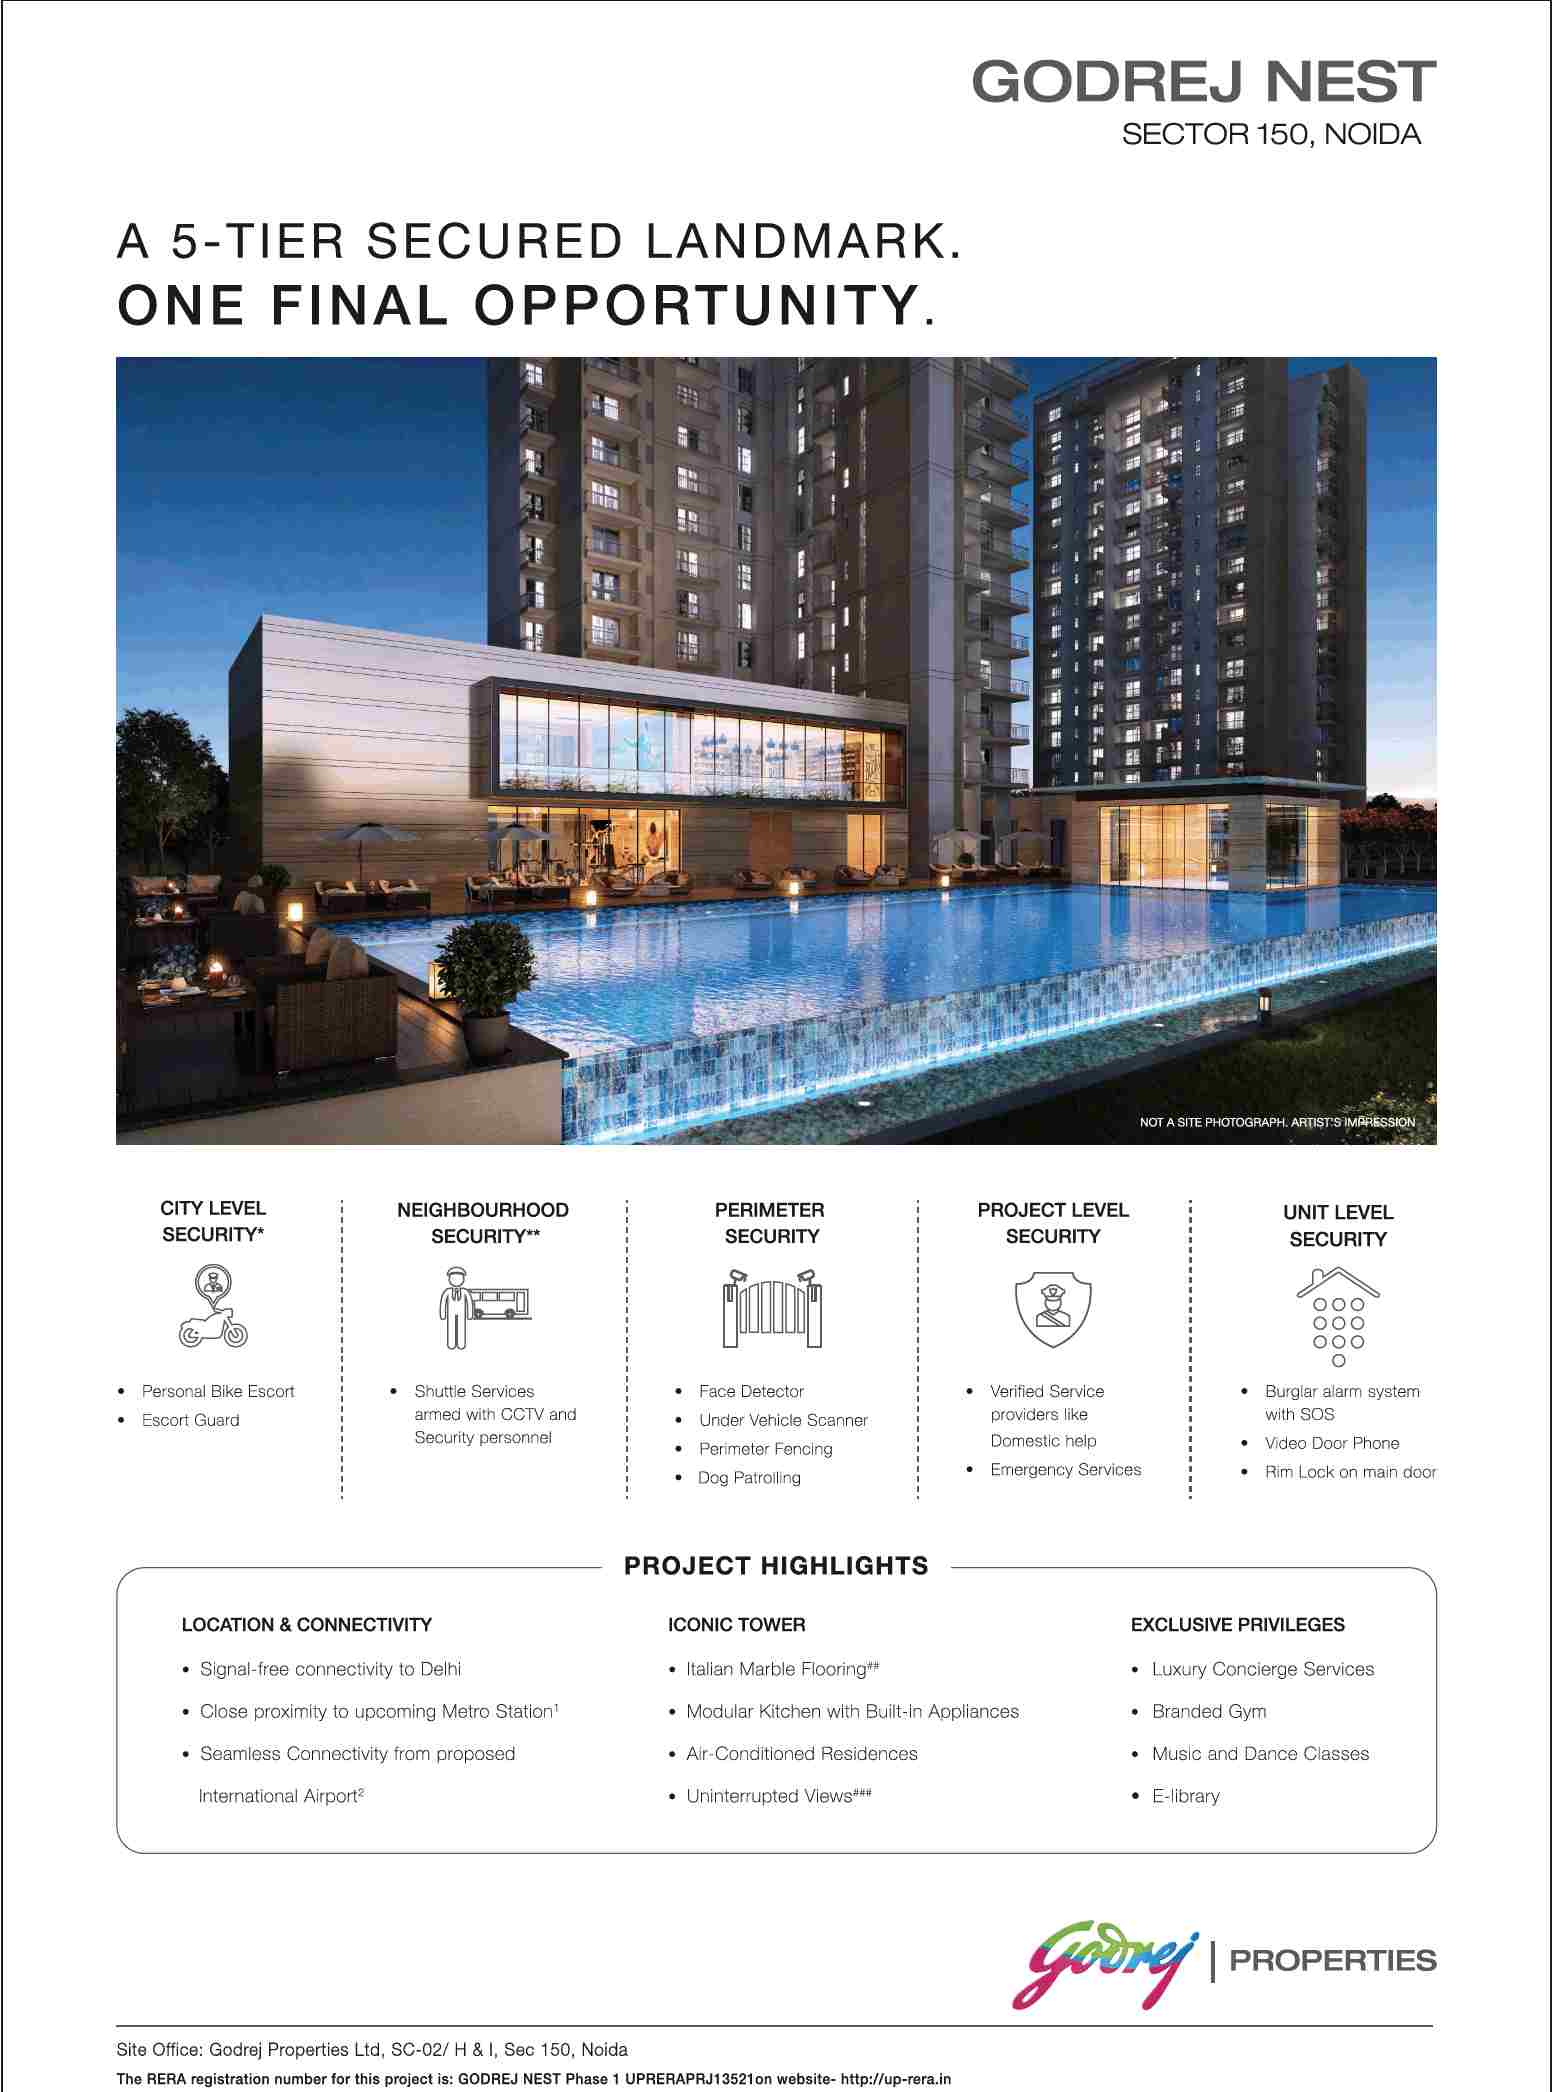 One final opportunity to live in 5 tier secured landmark at Godrej Nest in Noida